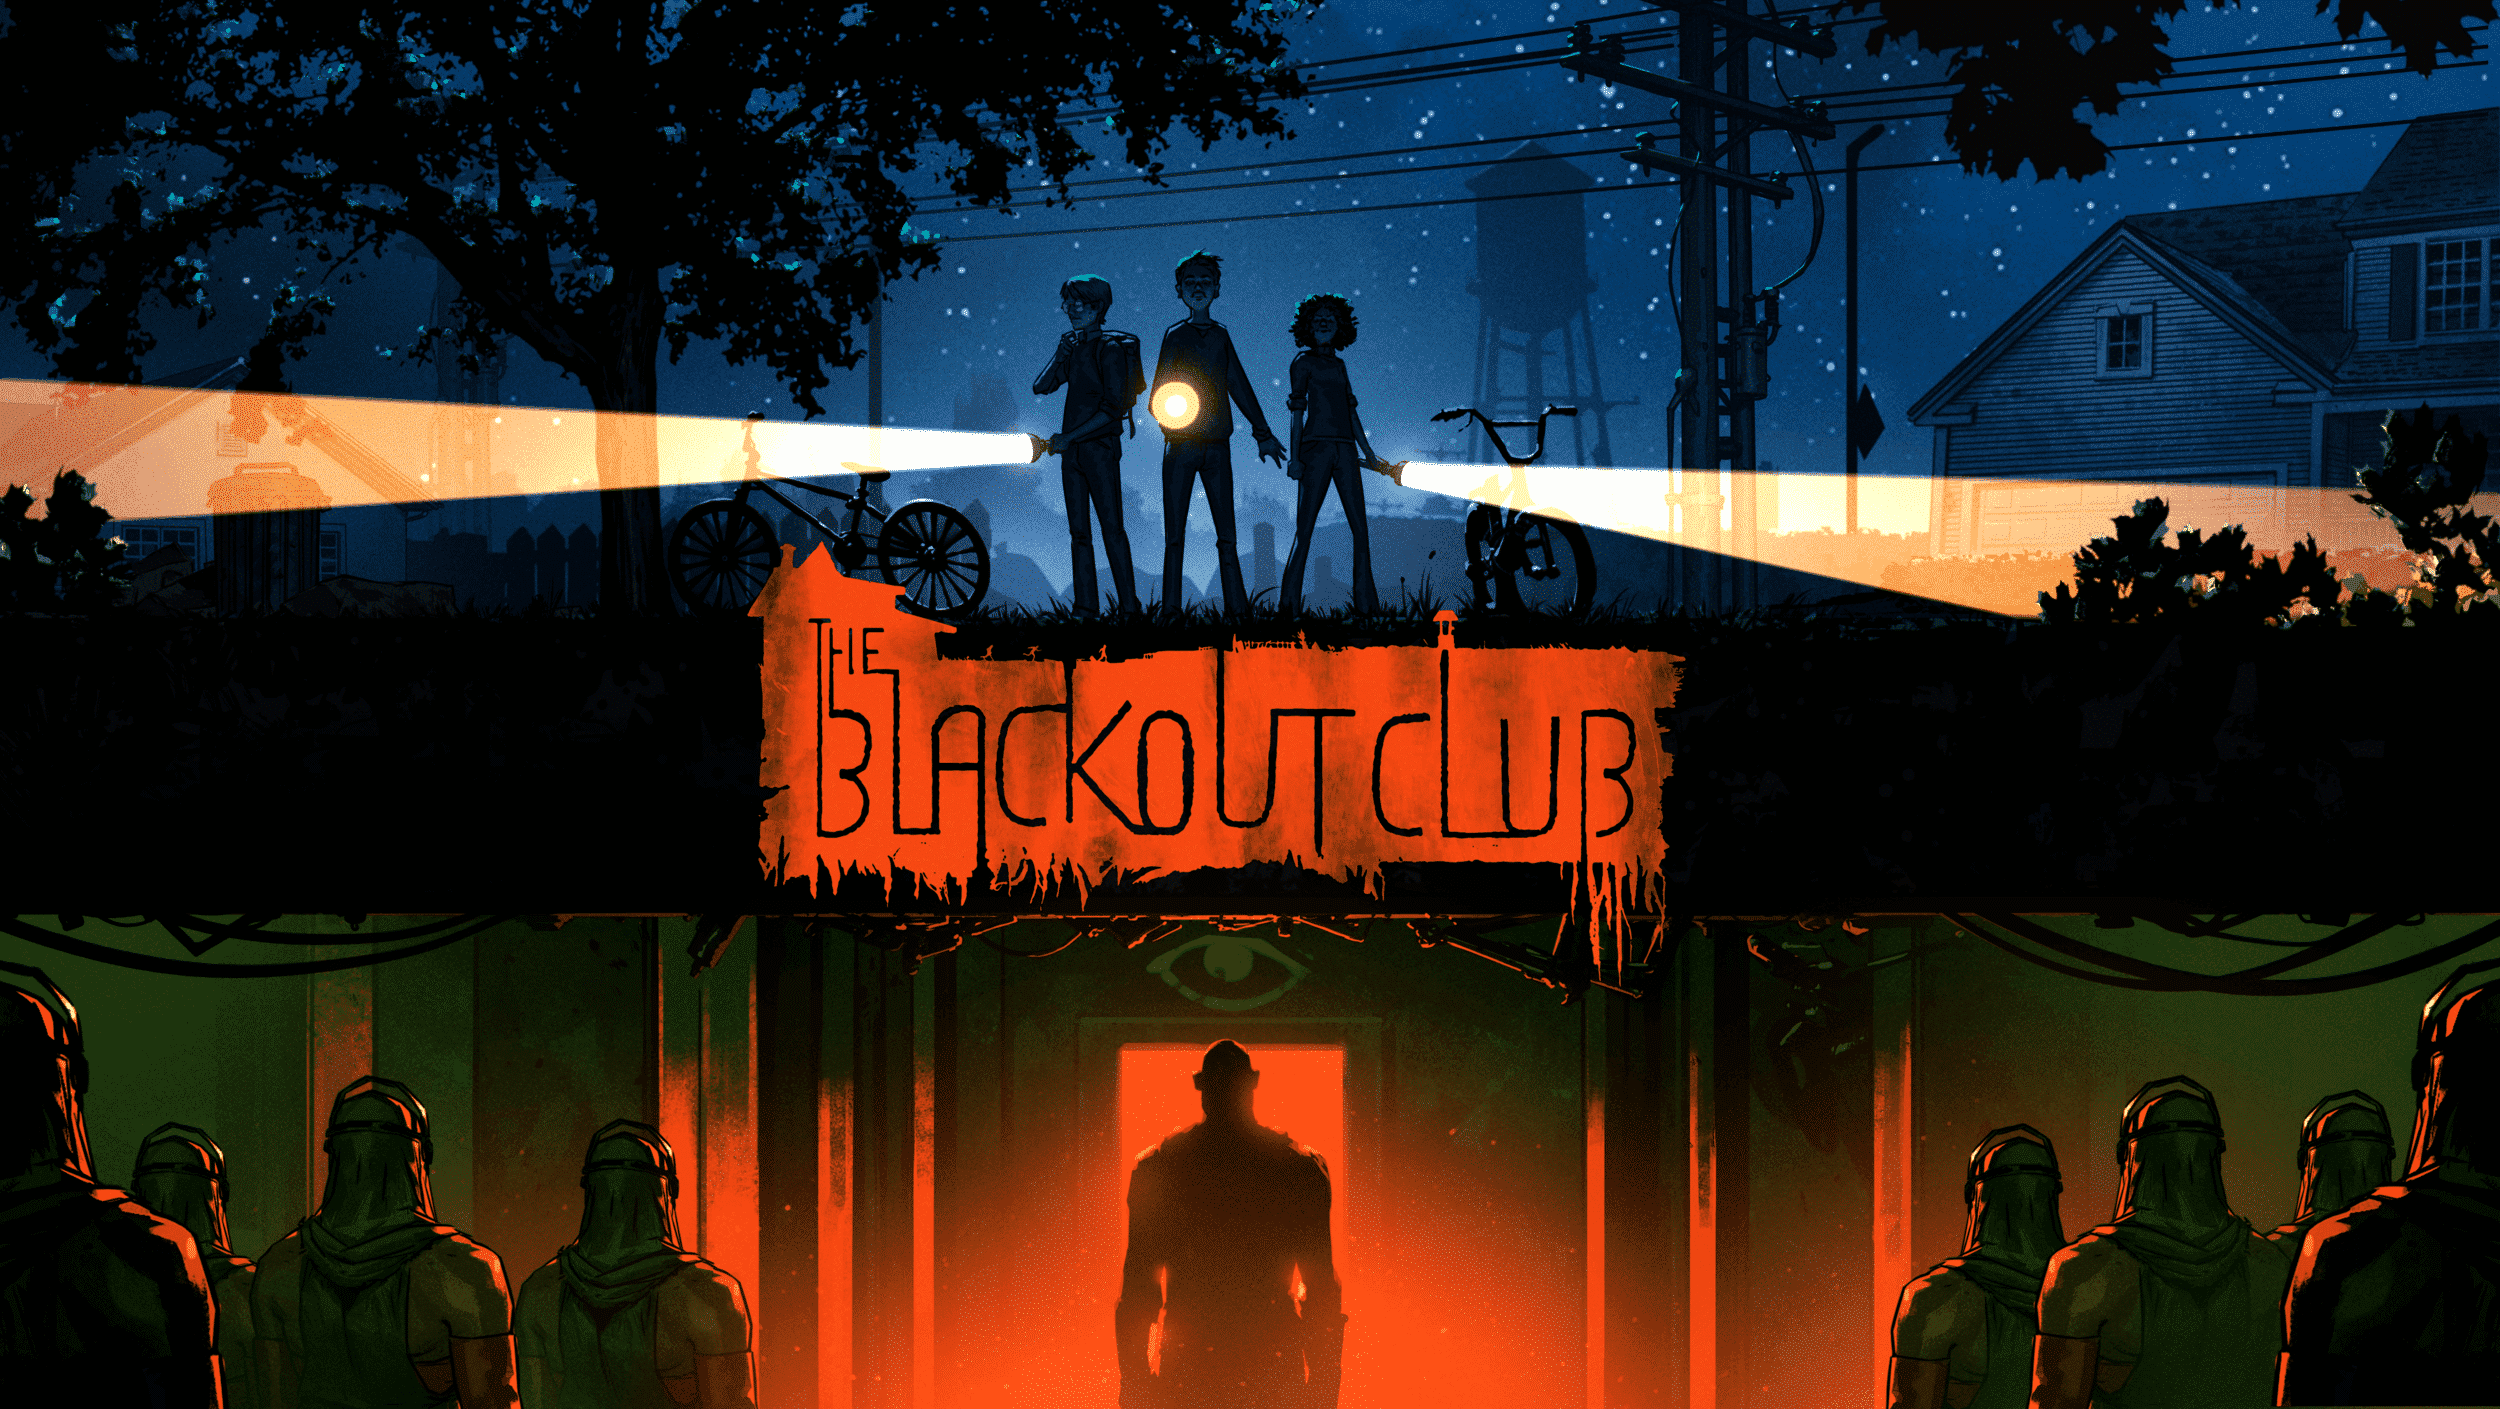 The Blackout Club Nintendo Switch Version Full Game Free Download 2019